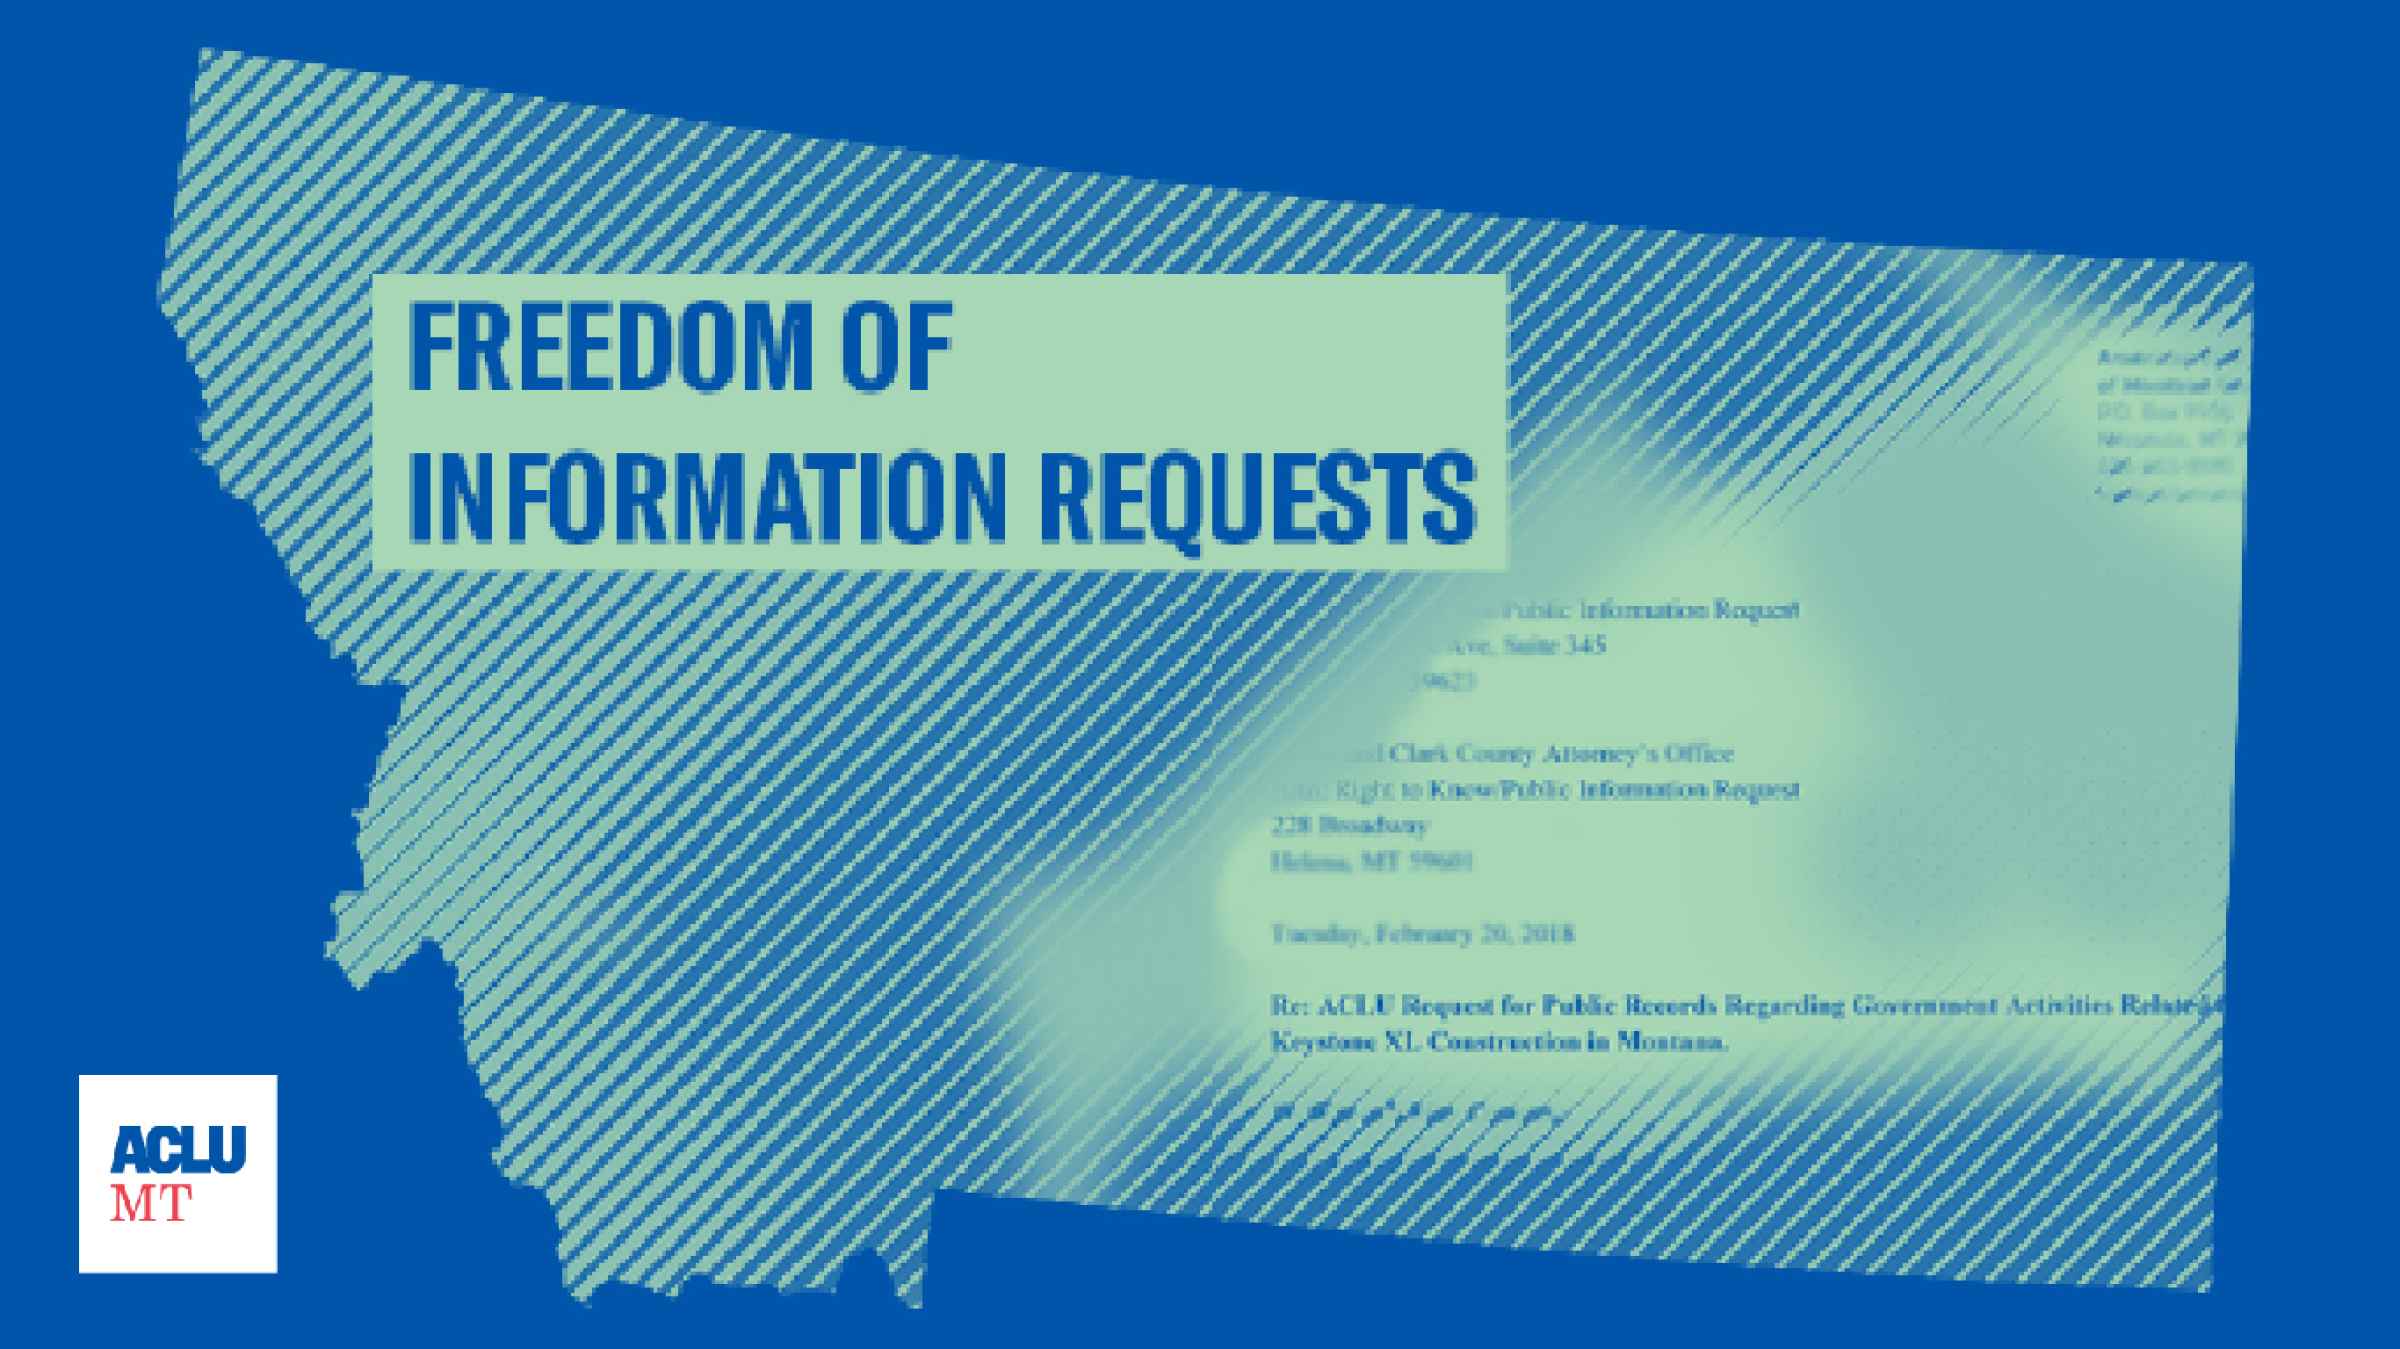 Graphic of Freedom of Information Requests